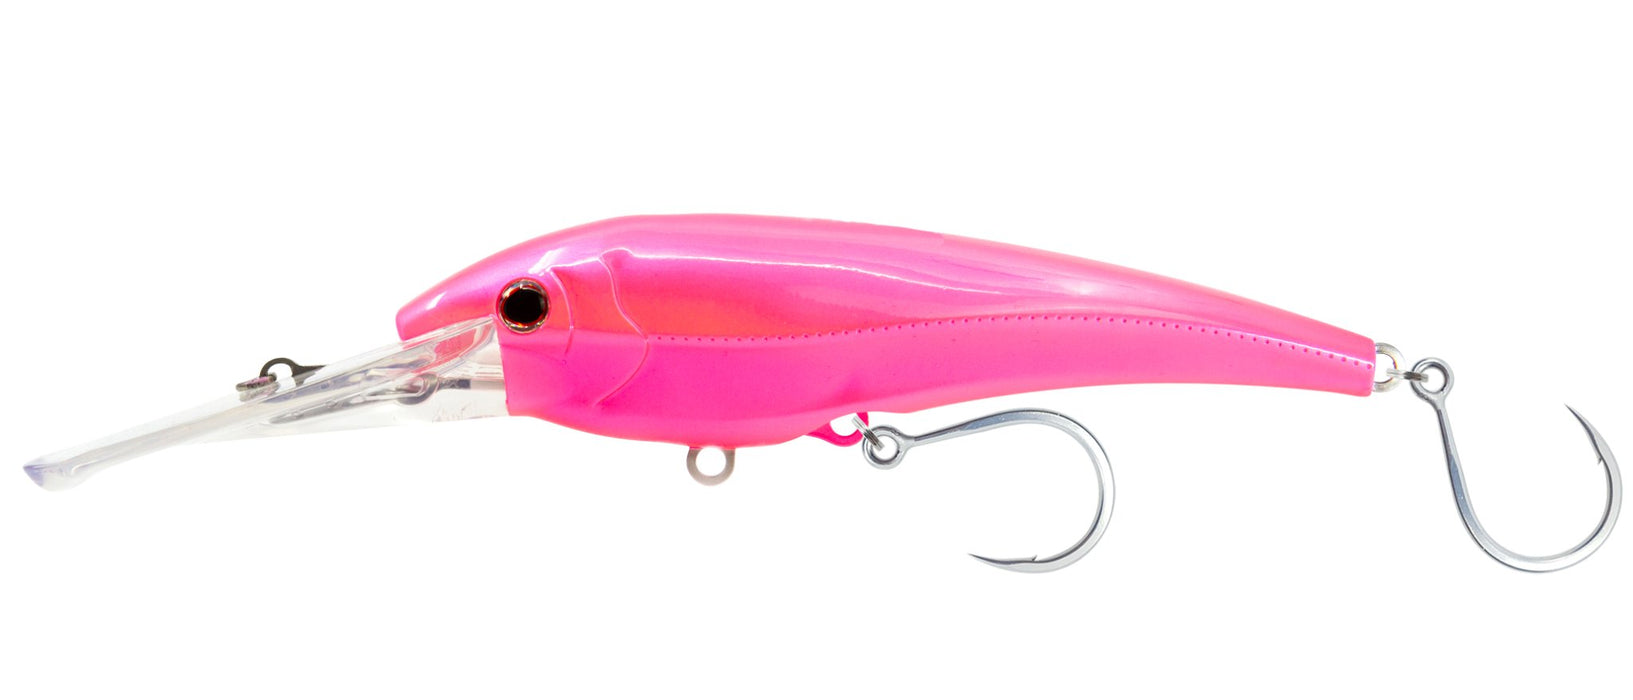 Nomad Design DTX Minnow 200mm Sinking Hard Body Fishing Lure #CT